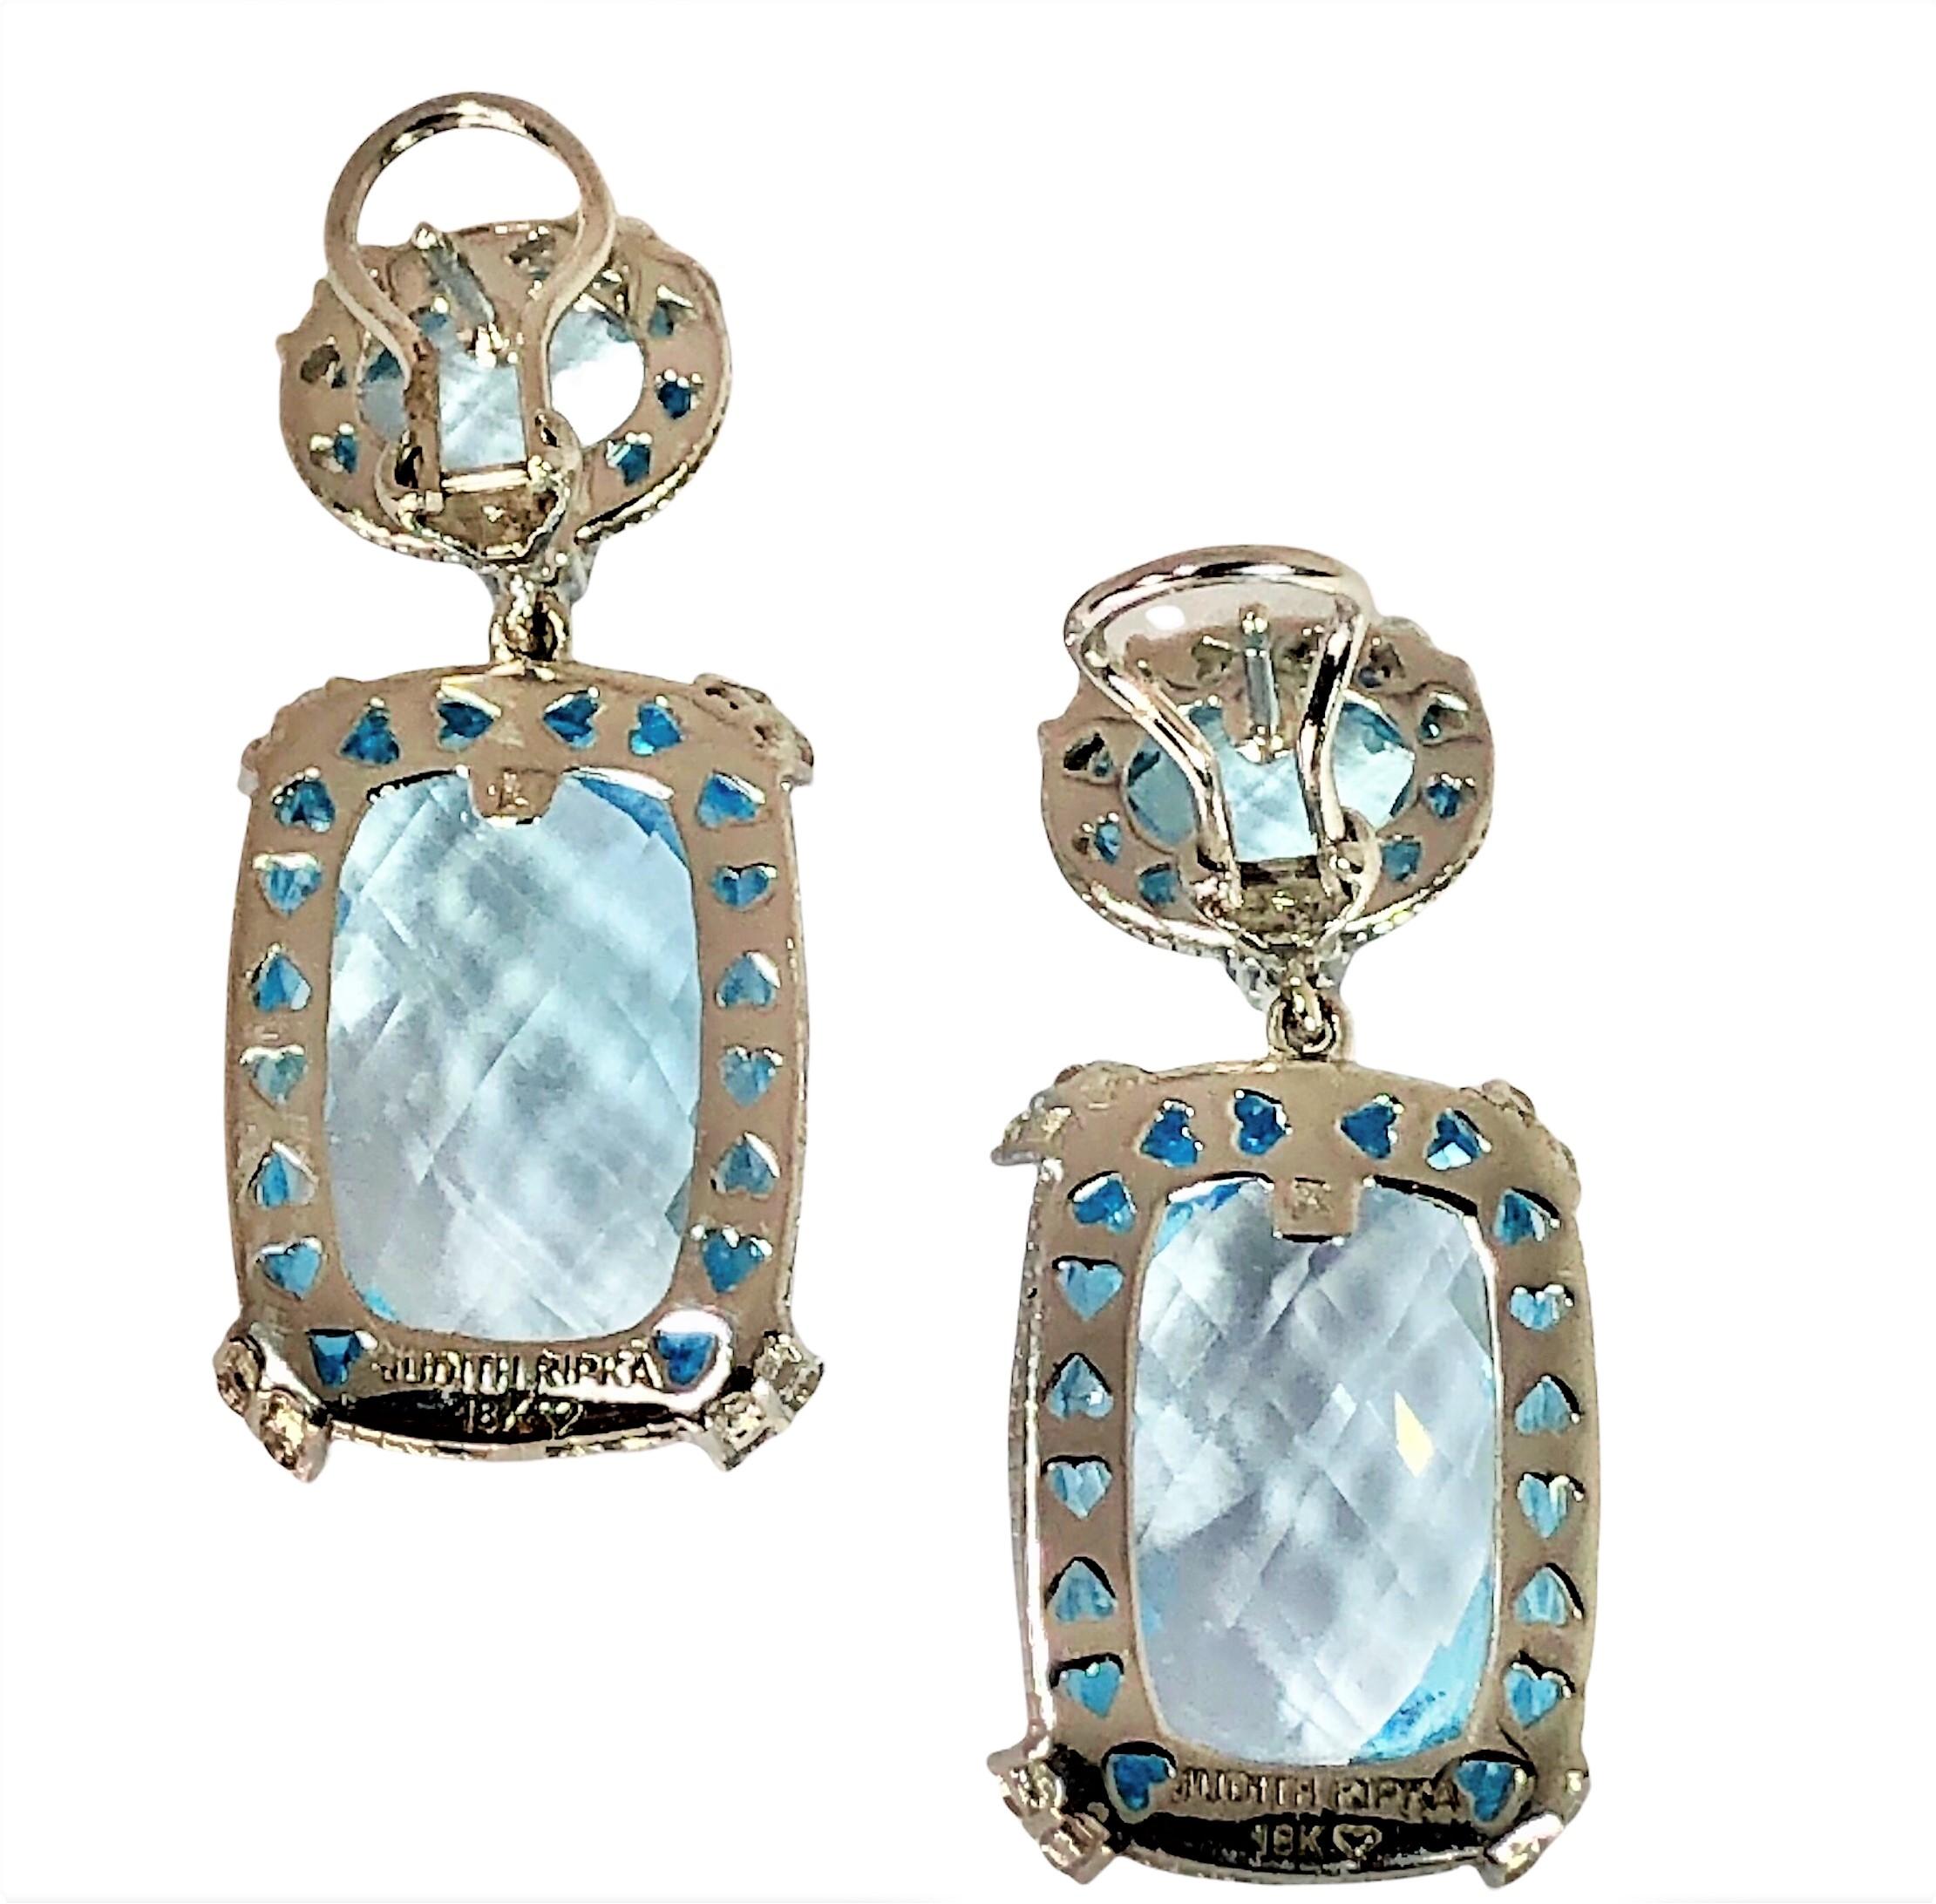 This is a truly stunning pair of 18k white gold, diamond and blue topaz earrings by Judith Ripka. Each earring is set with one checkerboard faceted natural blue topaz cushion shaped briolette and one oval shaped blue topaz briolette faceted in the